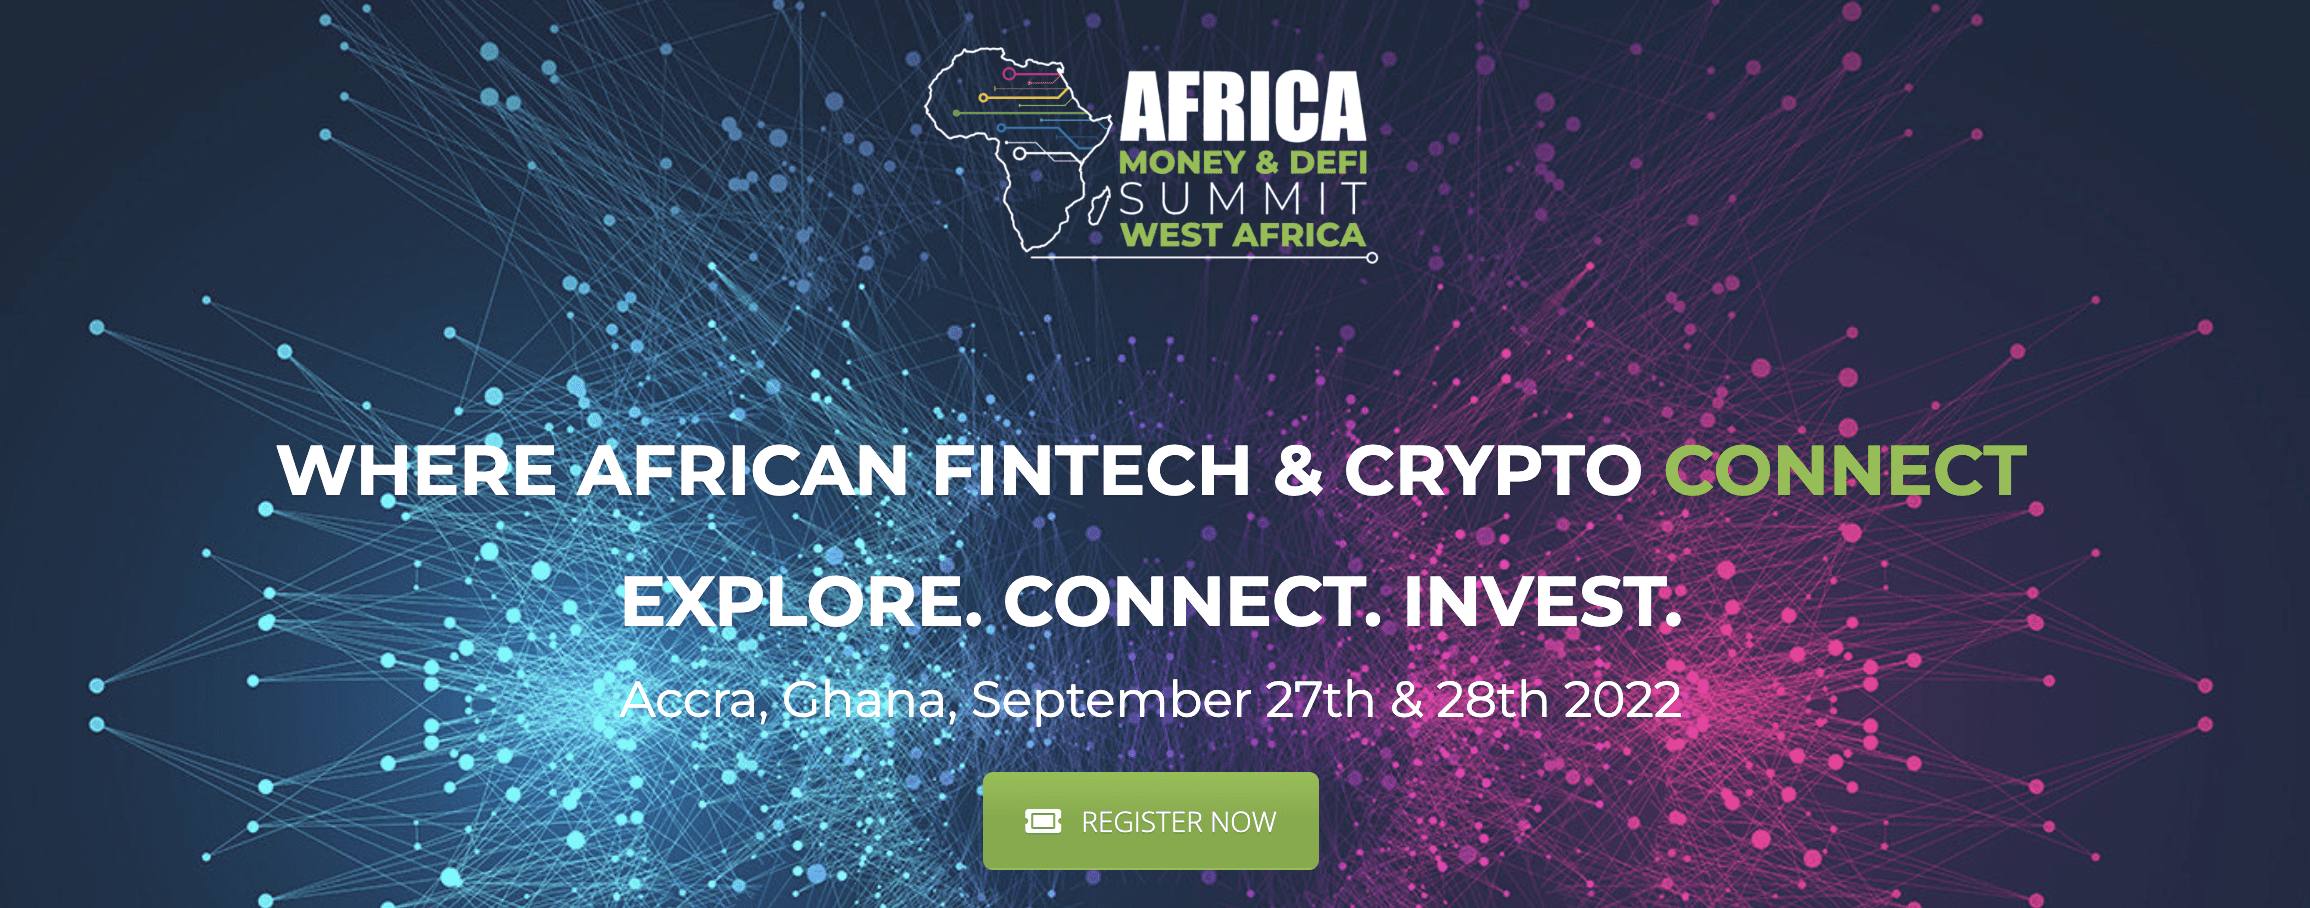 Africa fintech and crypto leaders to connect at the Africa Money and DeFi Summit in Ghana